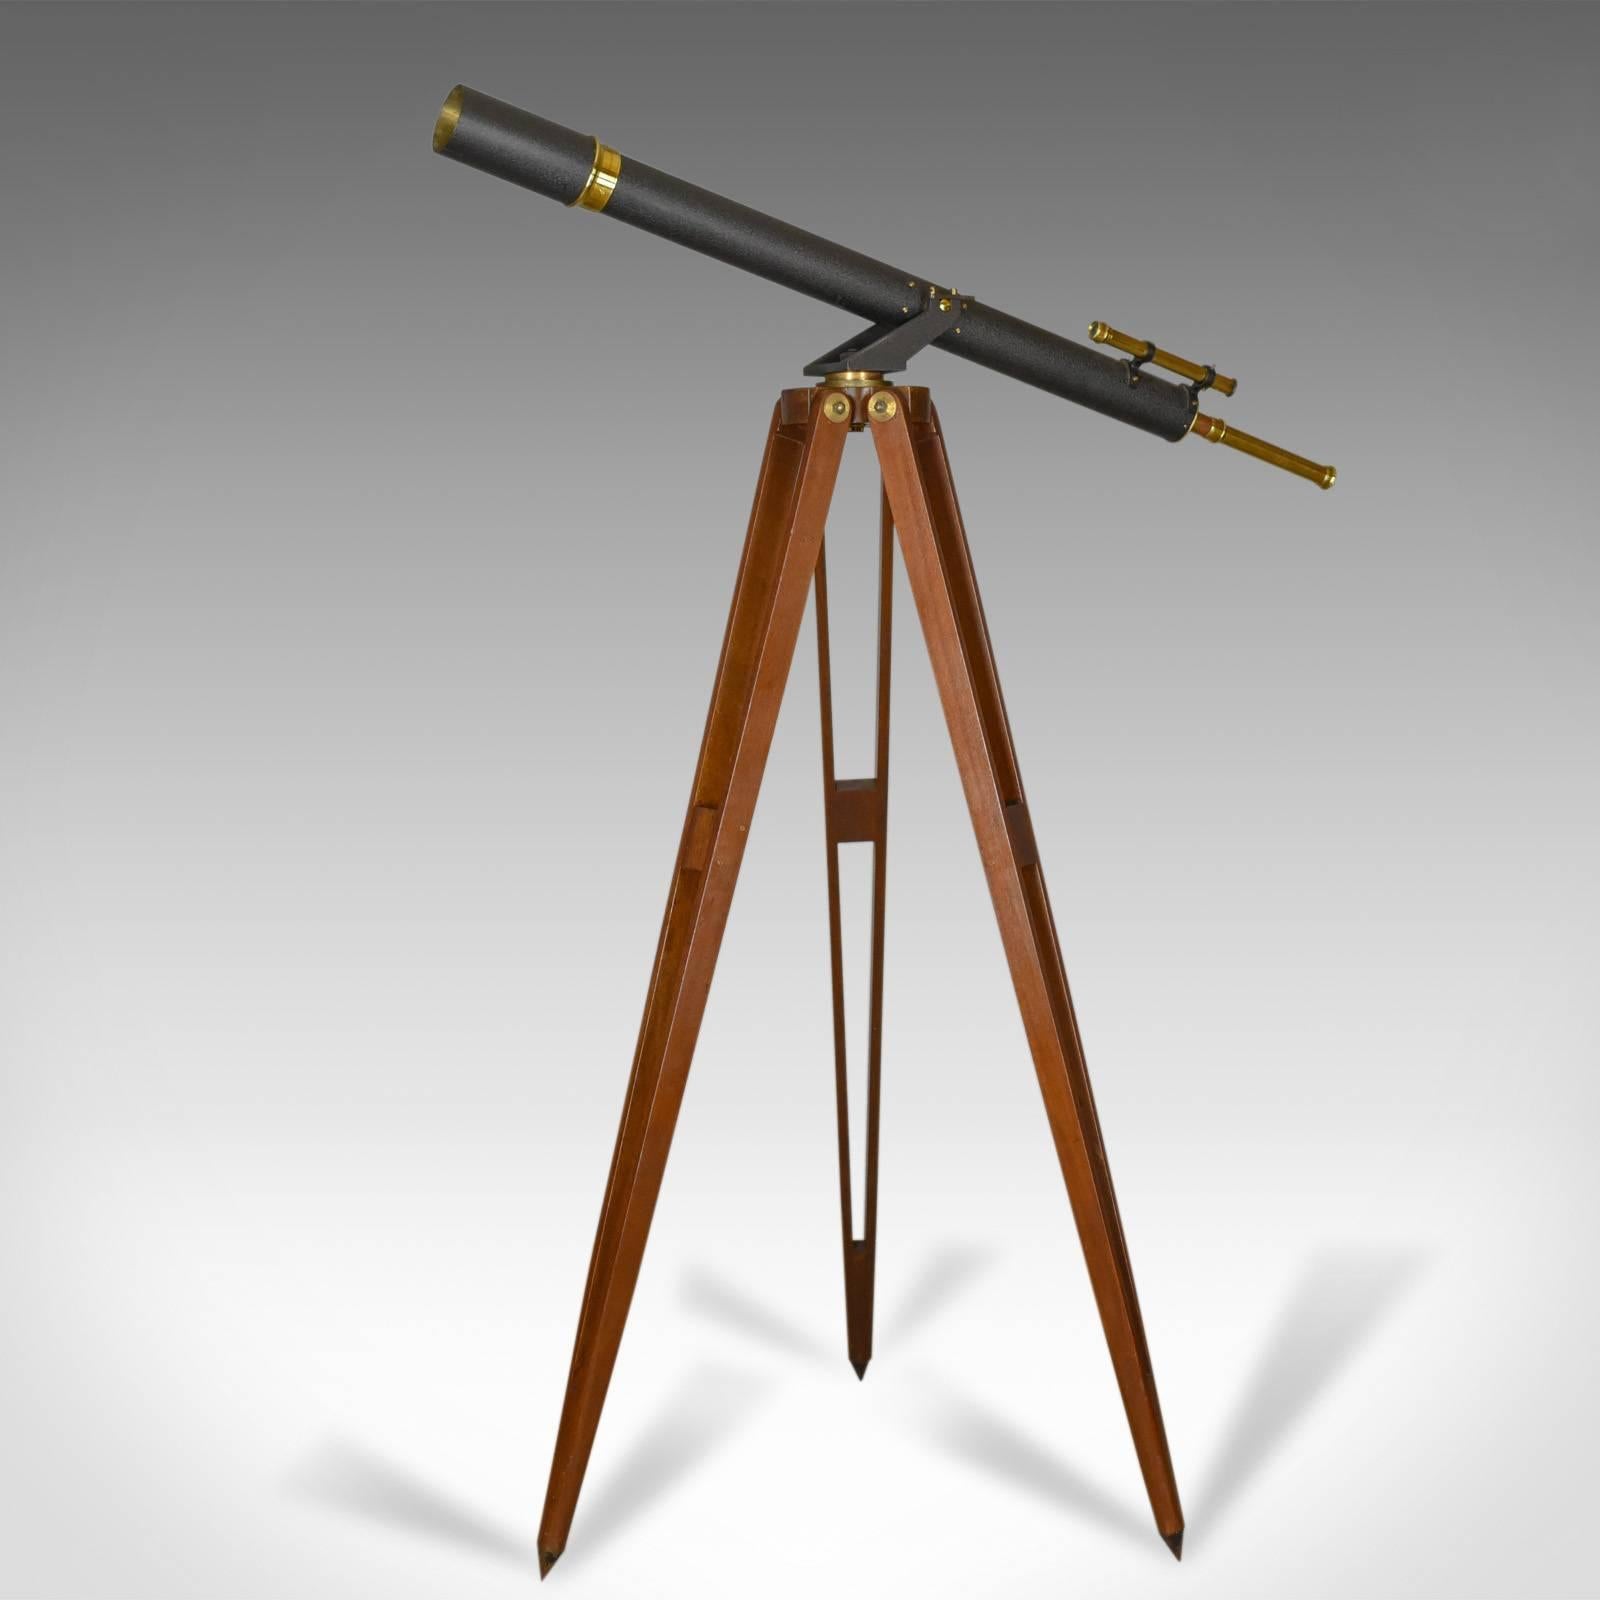 This is an antique telescope on tripod with original case, a three inch refractor for terrestrial or astronomical use, a 'Starboy' by Broadhurst Clarkson and Co. Ltd, 63 Farringdon Road, London and dating to circa 1920-40.

Raised on a mahogany